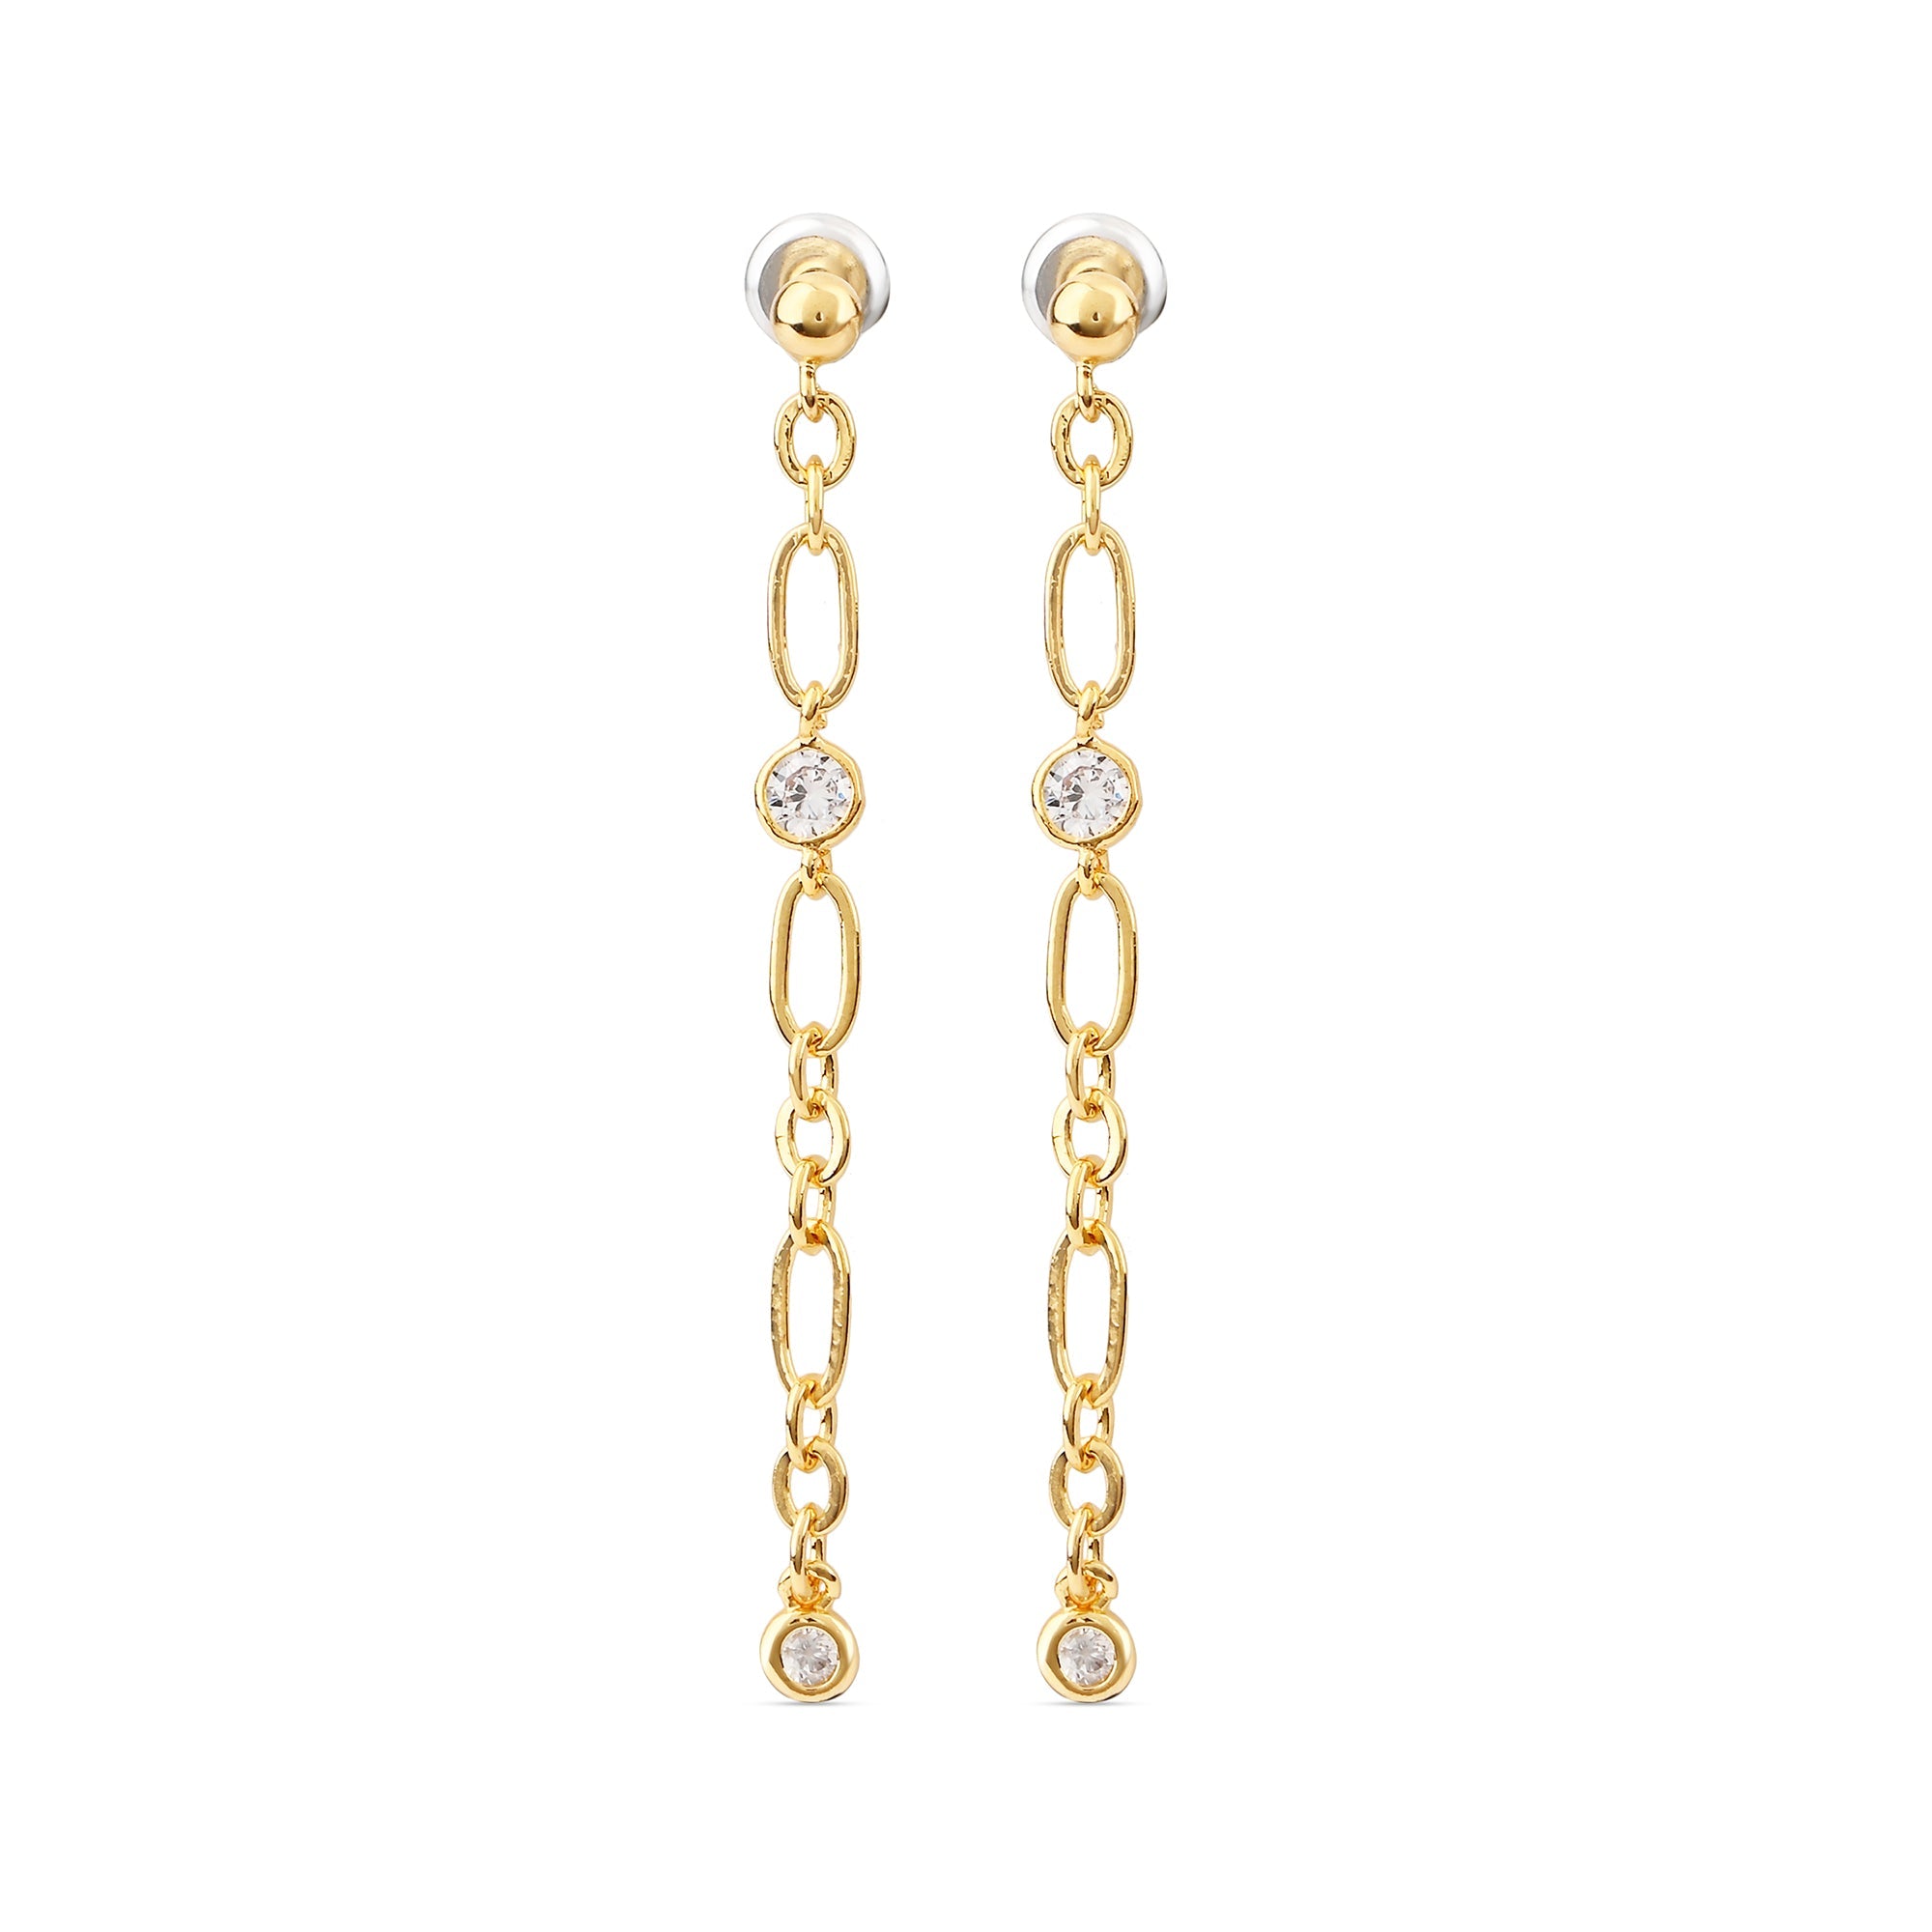 Real Gold Plated Z Gold Sparkle Long Chain Earrings